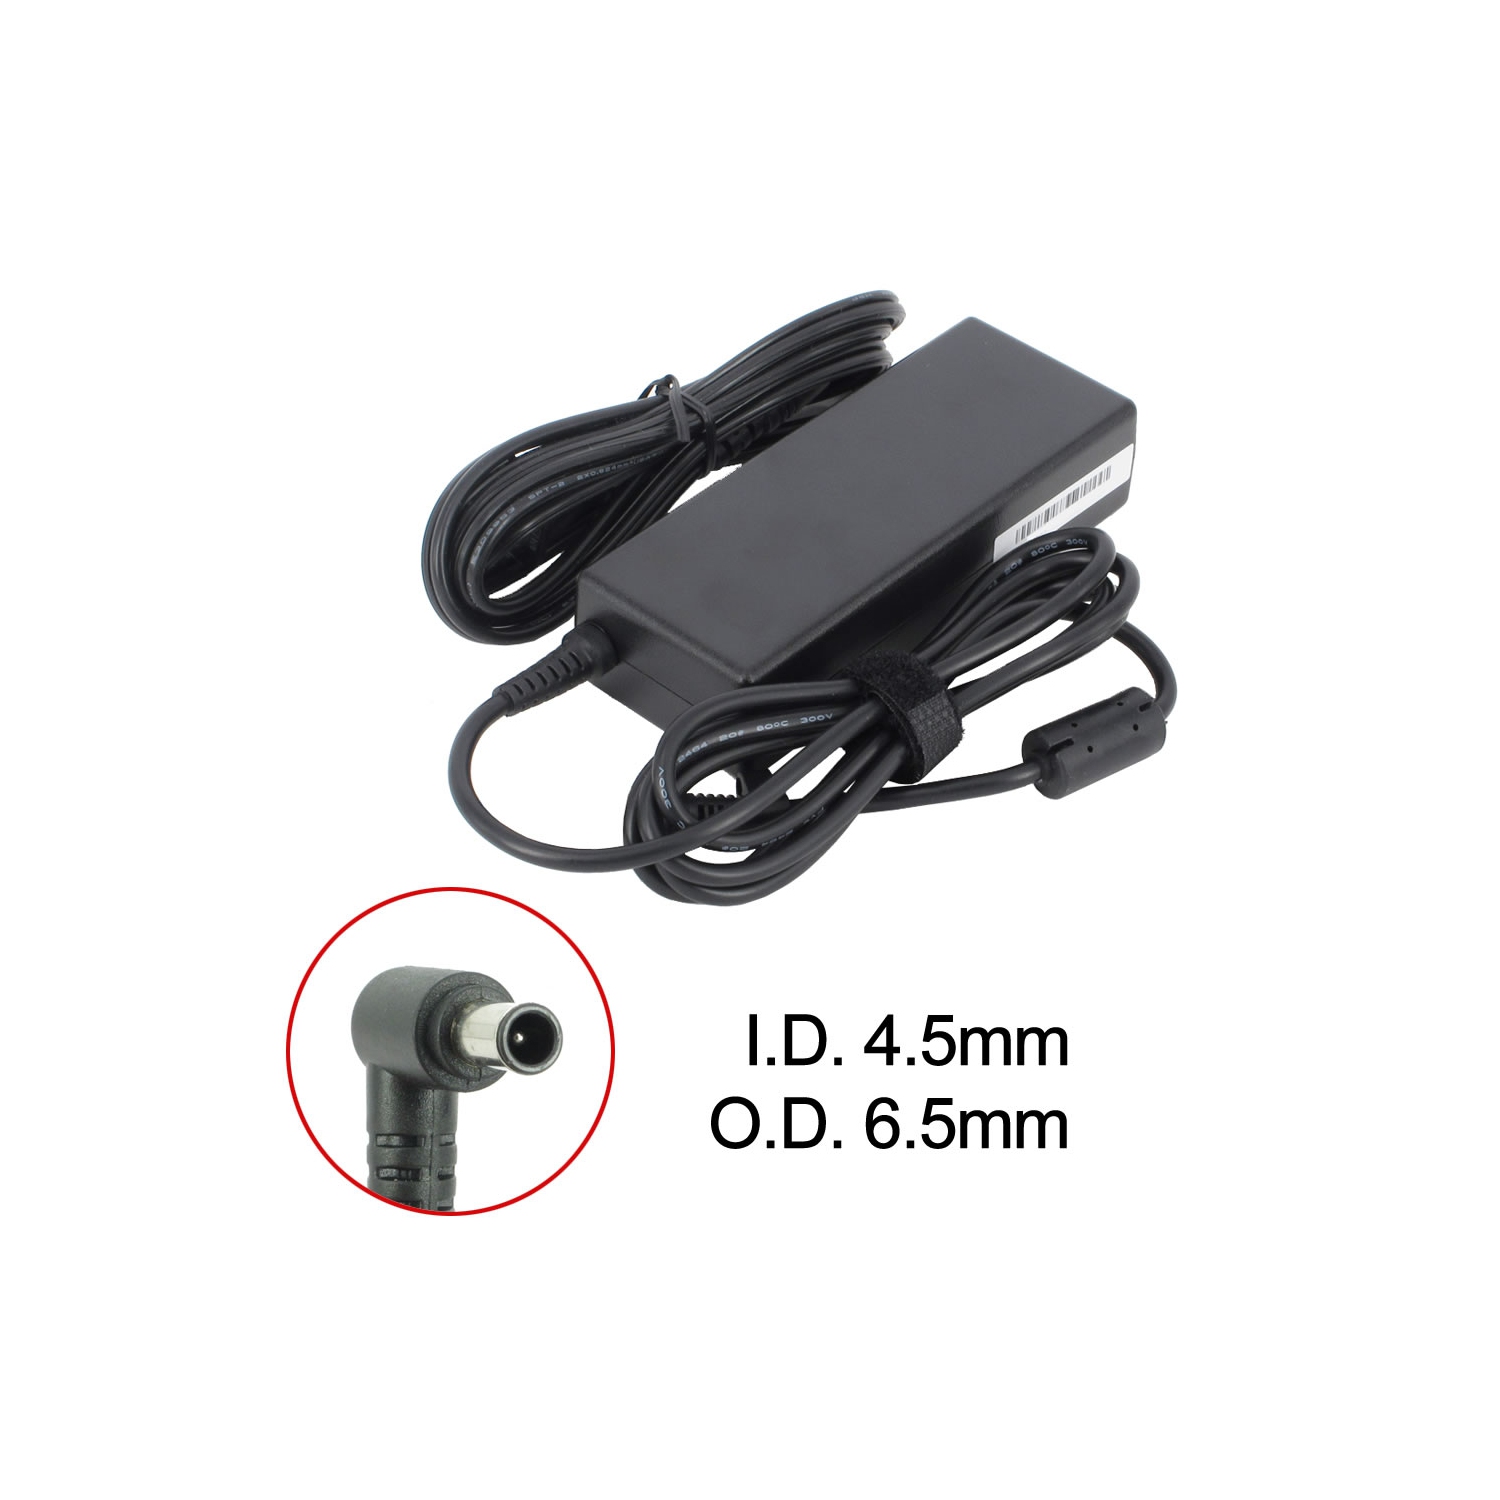 Brand New Laptop AC Adapter for LG XNOTE A405, ADP-90TH A, PCGA-AC19V19, VGP-AC19V14, VGP-AC19V26, VGP-AC19V43